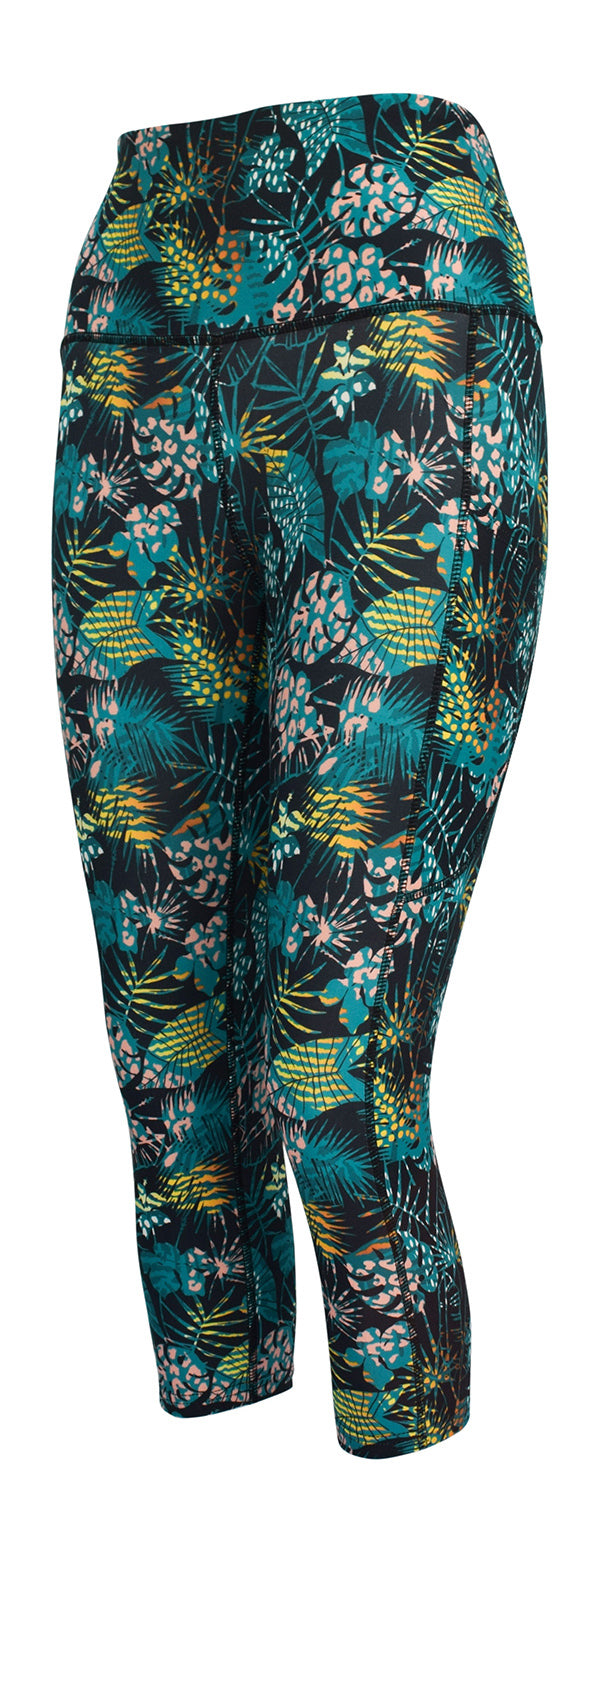 Rumble In The Jungle + Pockets-Adult Pocket Leggings